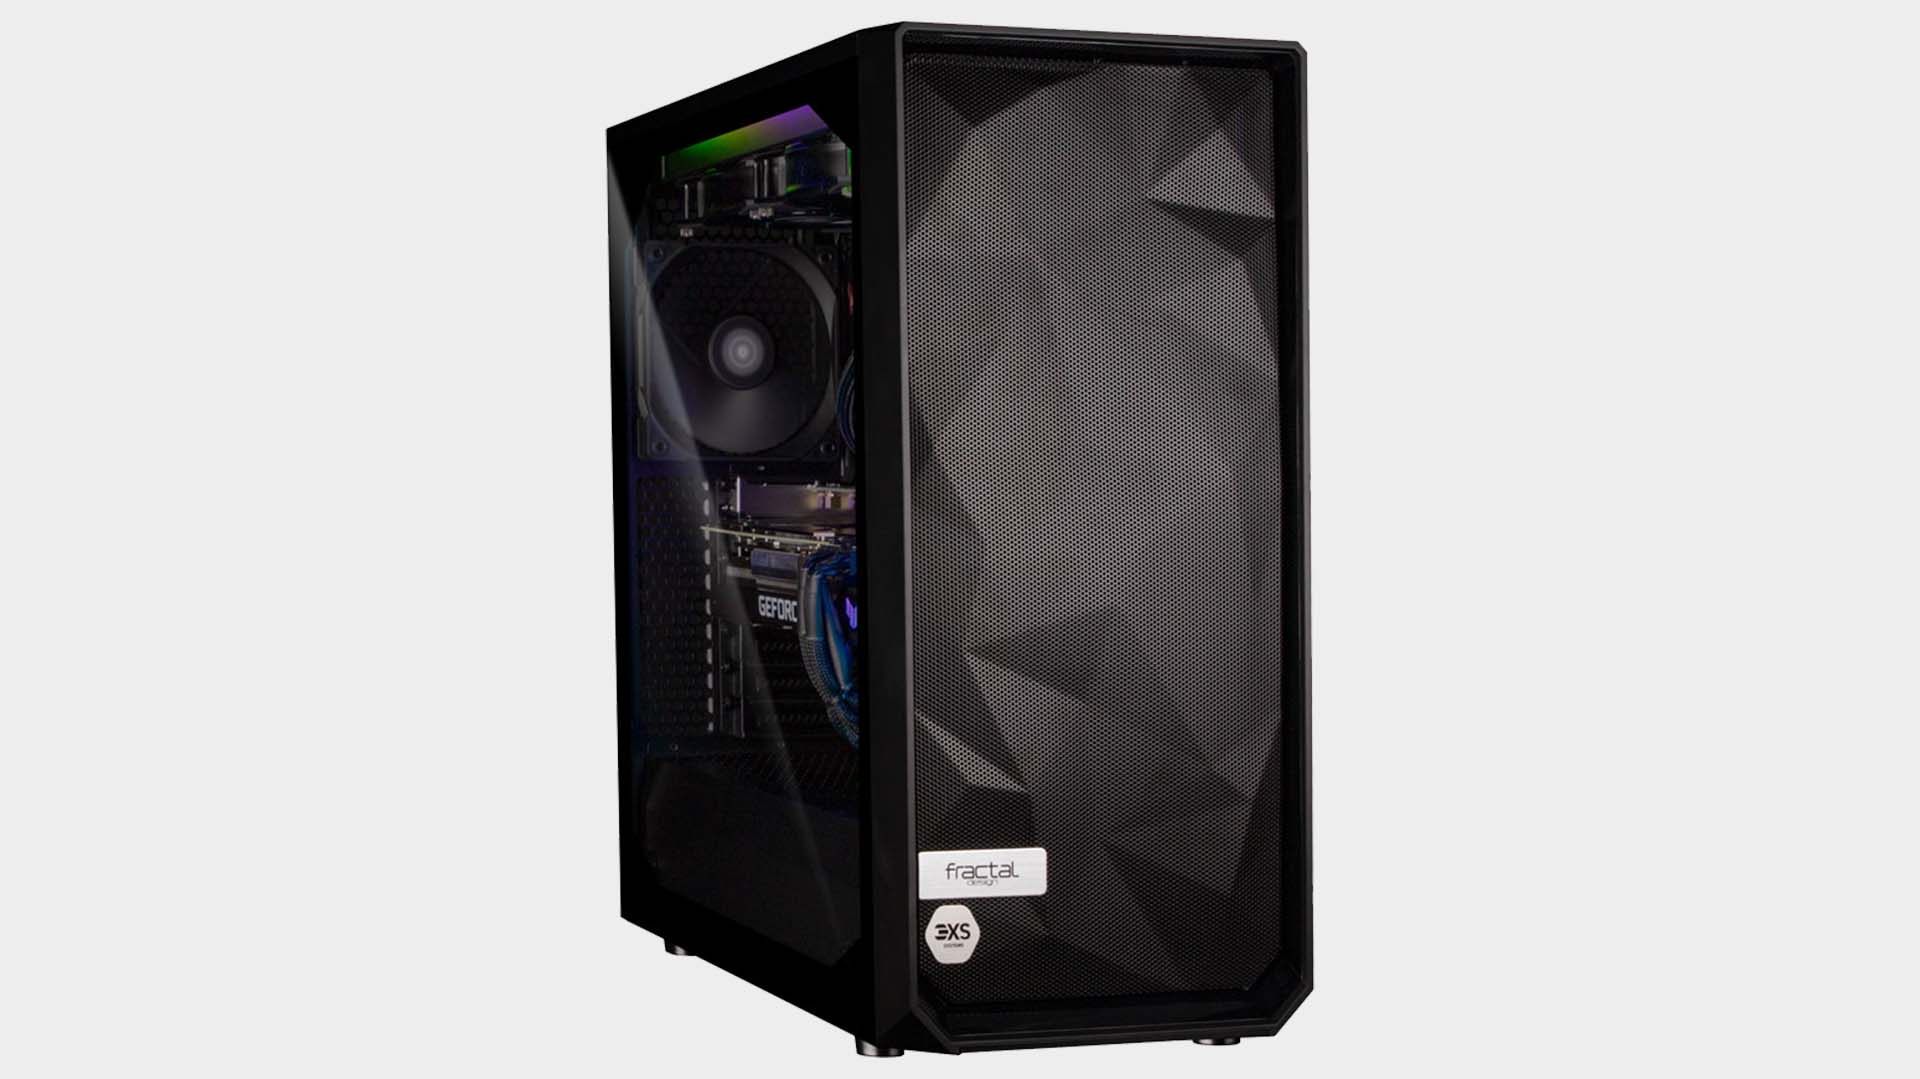 Scan 3XS gaming PC from the front on a grey background